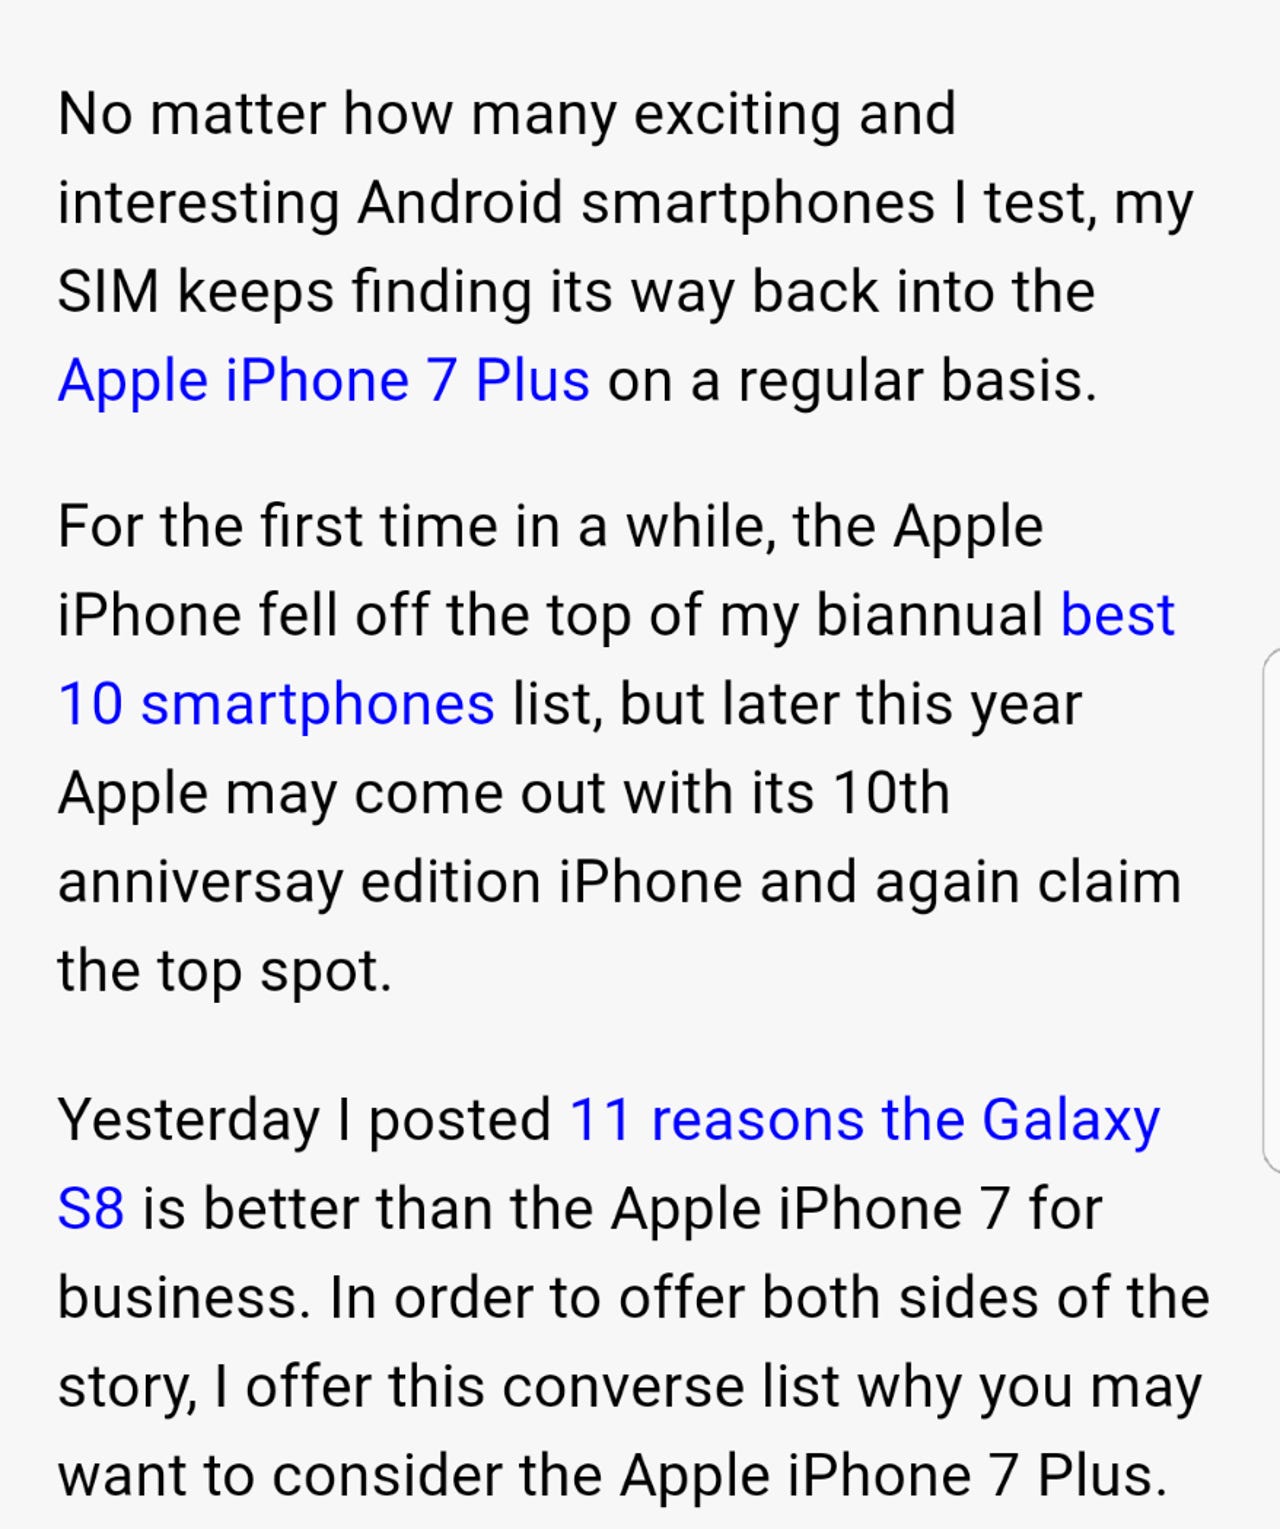 samsung-apps-on-s8-6.png